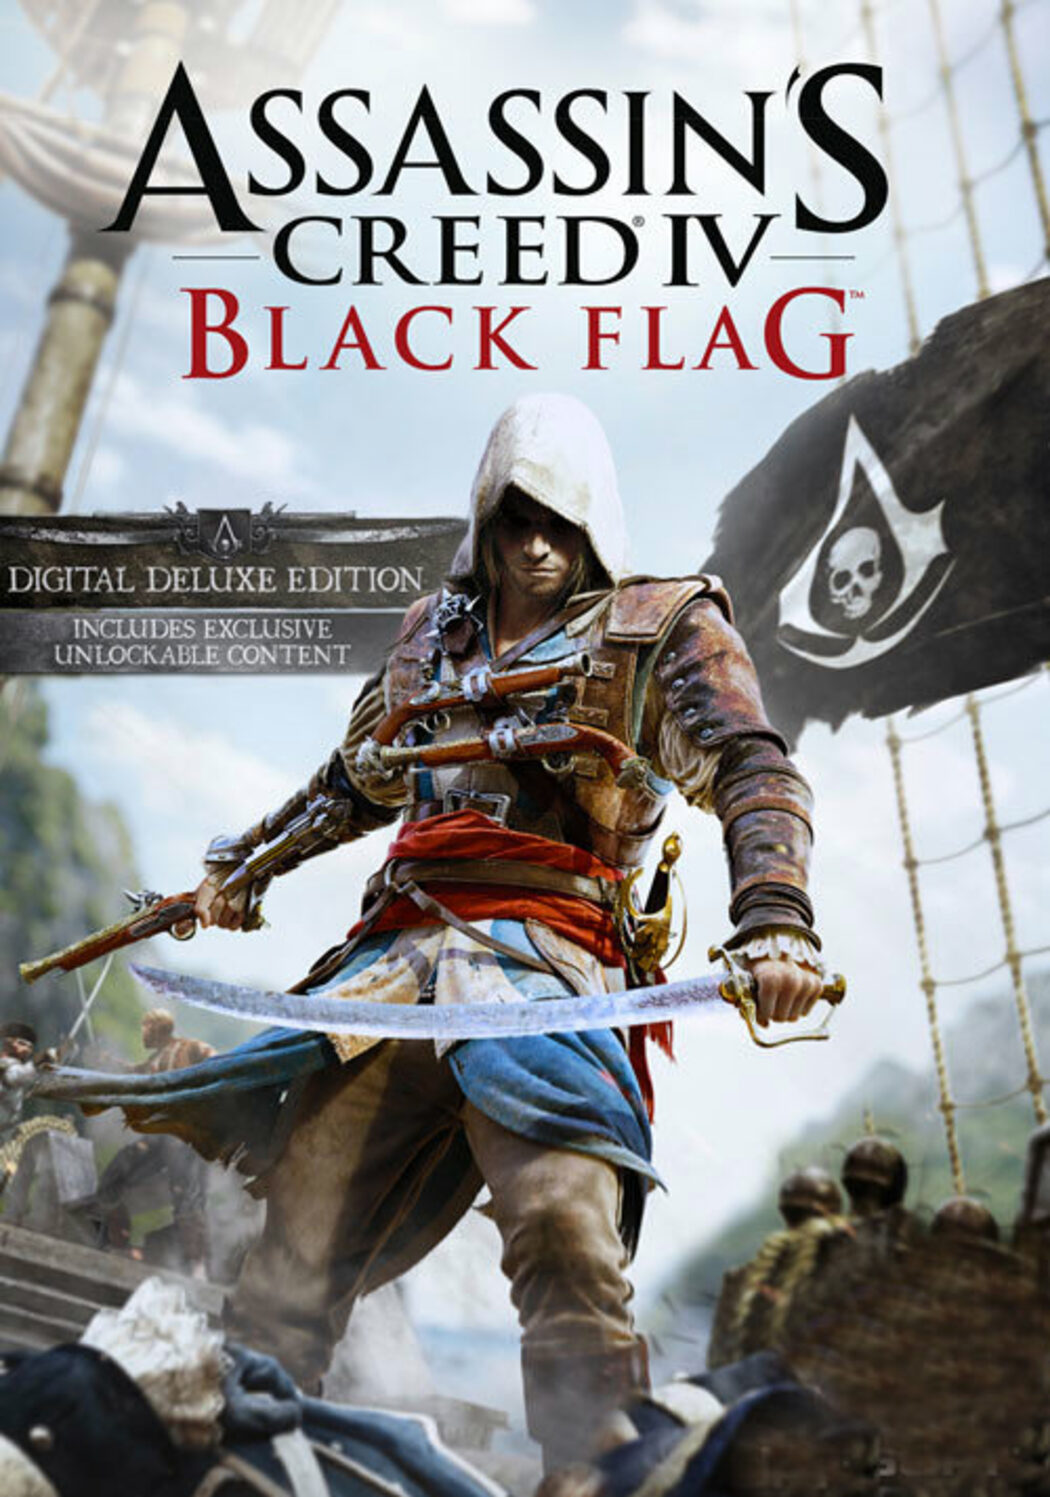 ASSASSIN'S CREED IV BLACK FLAG – DELUXE EDITION